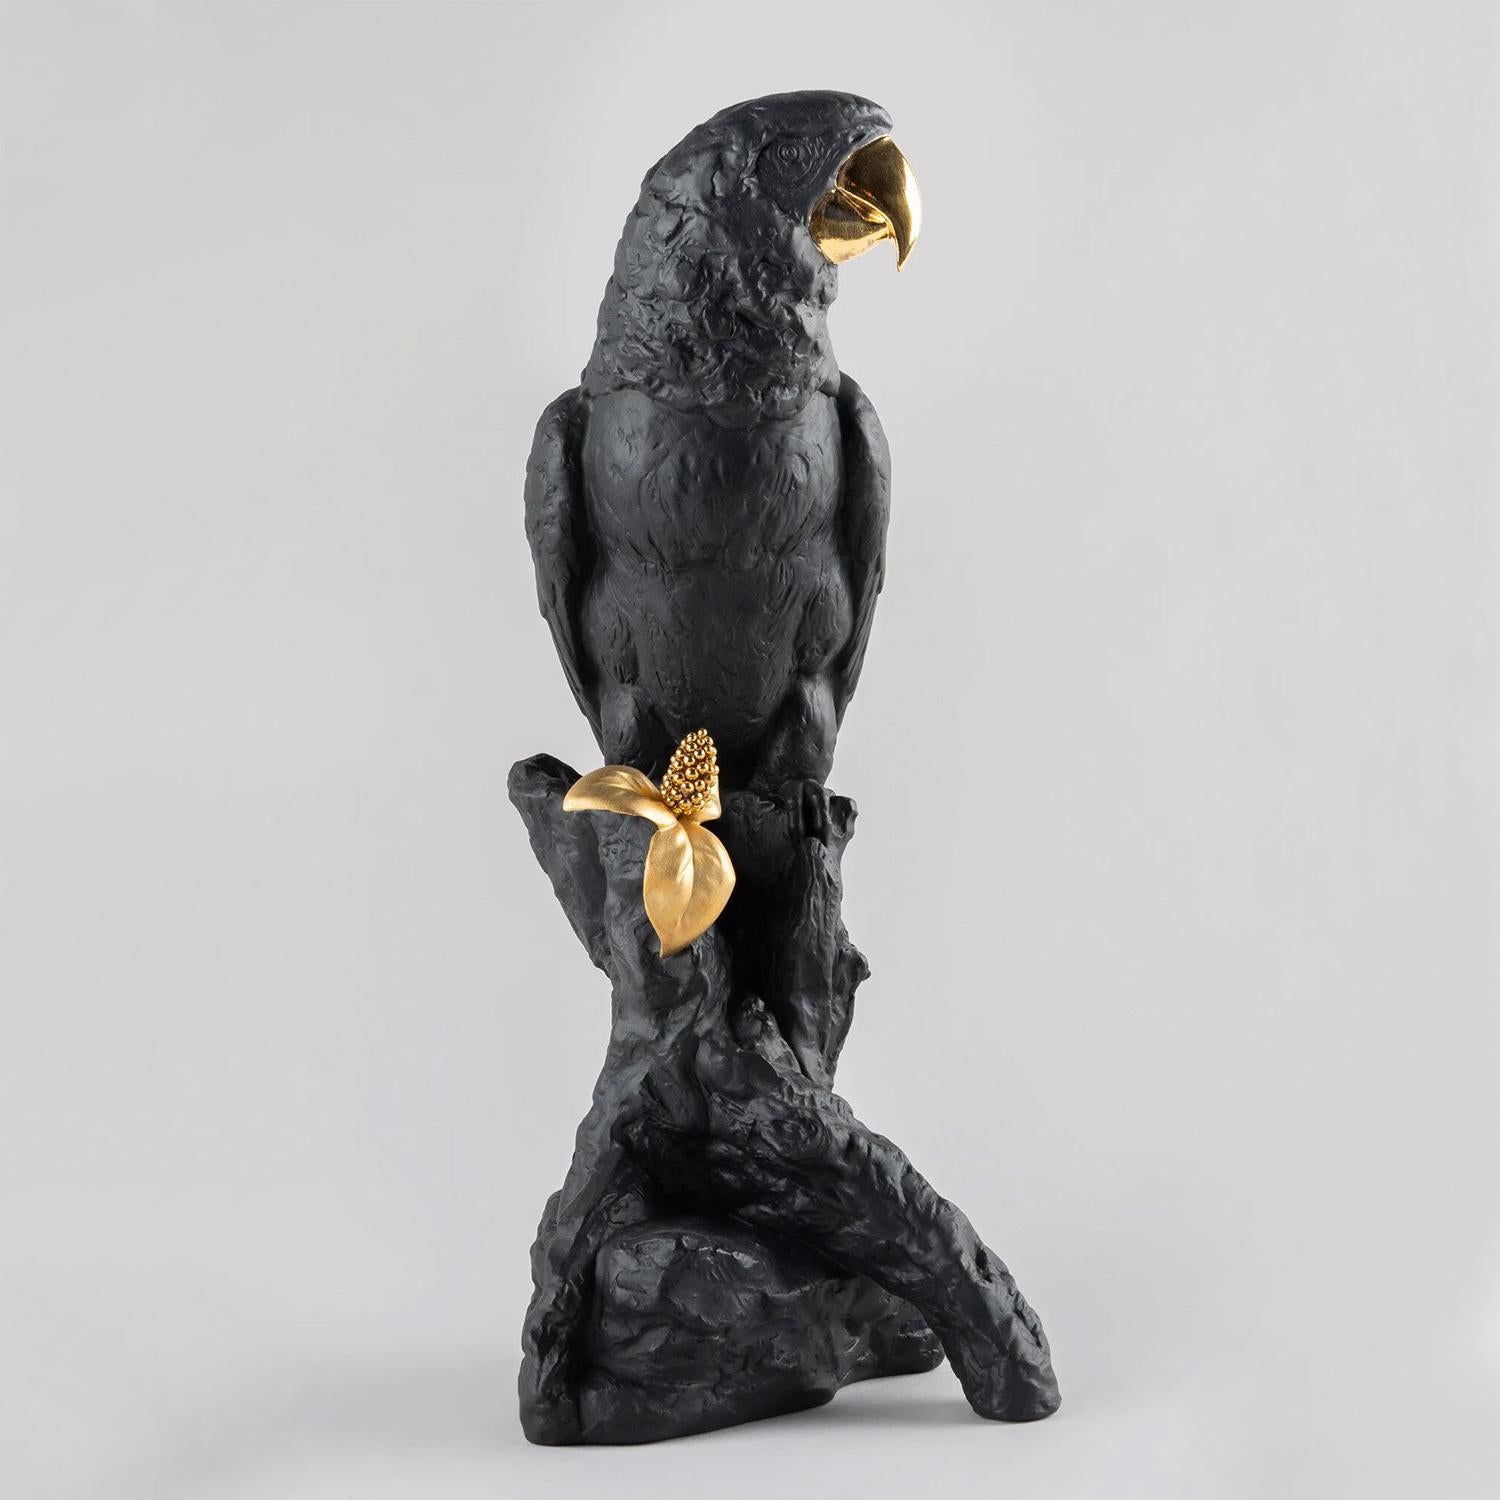 Sculpture Dark and Gold Parrot with all structure in 
porcelain in black matte and shiny gold finish.